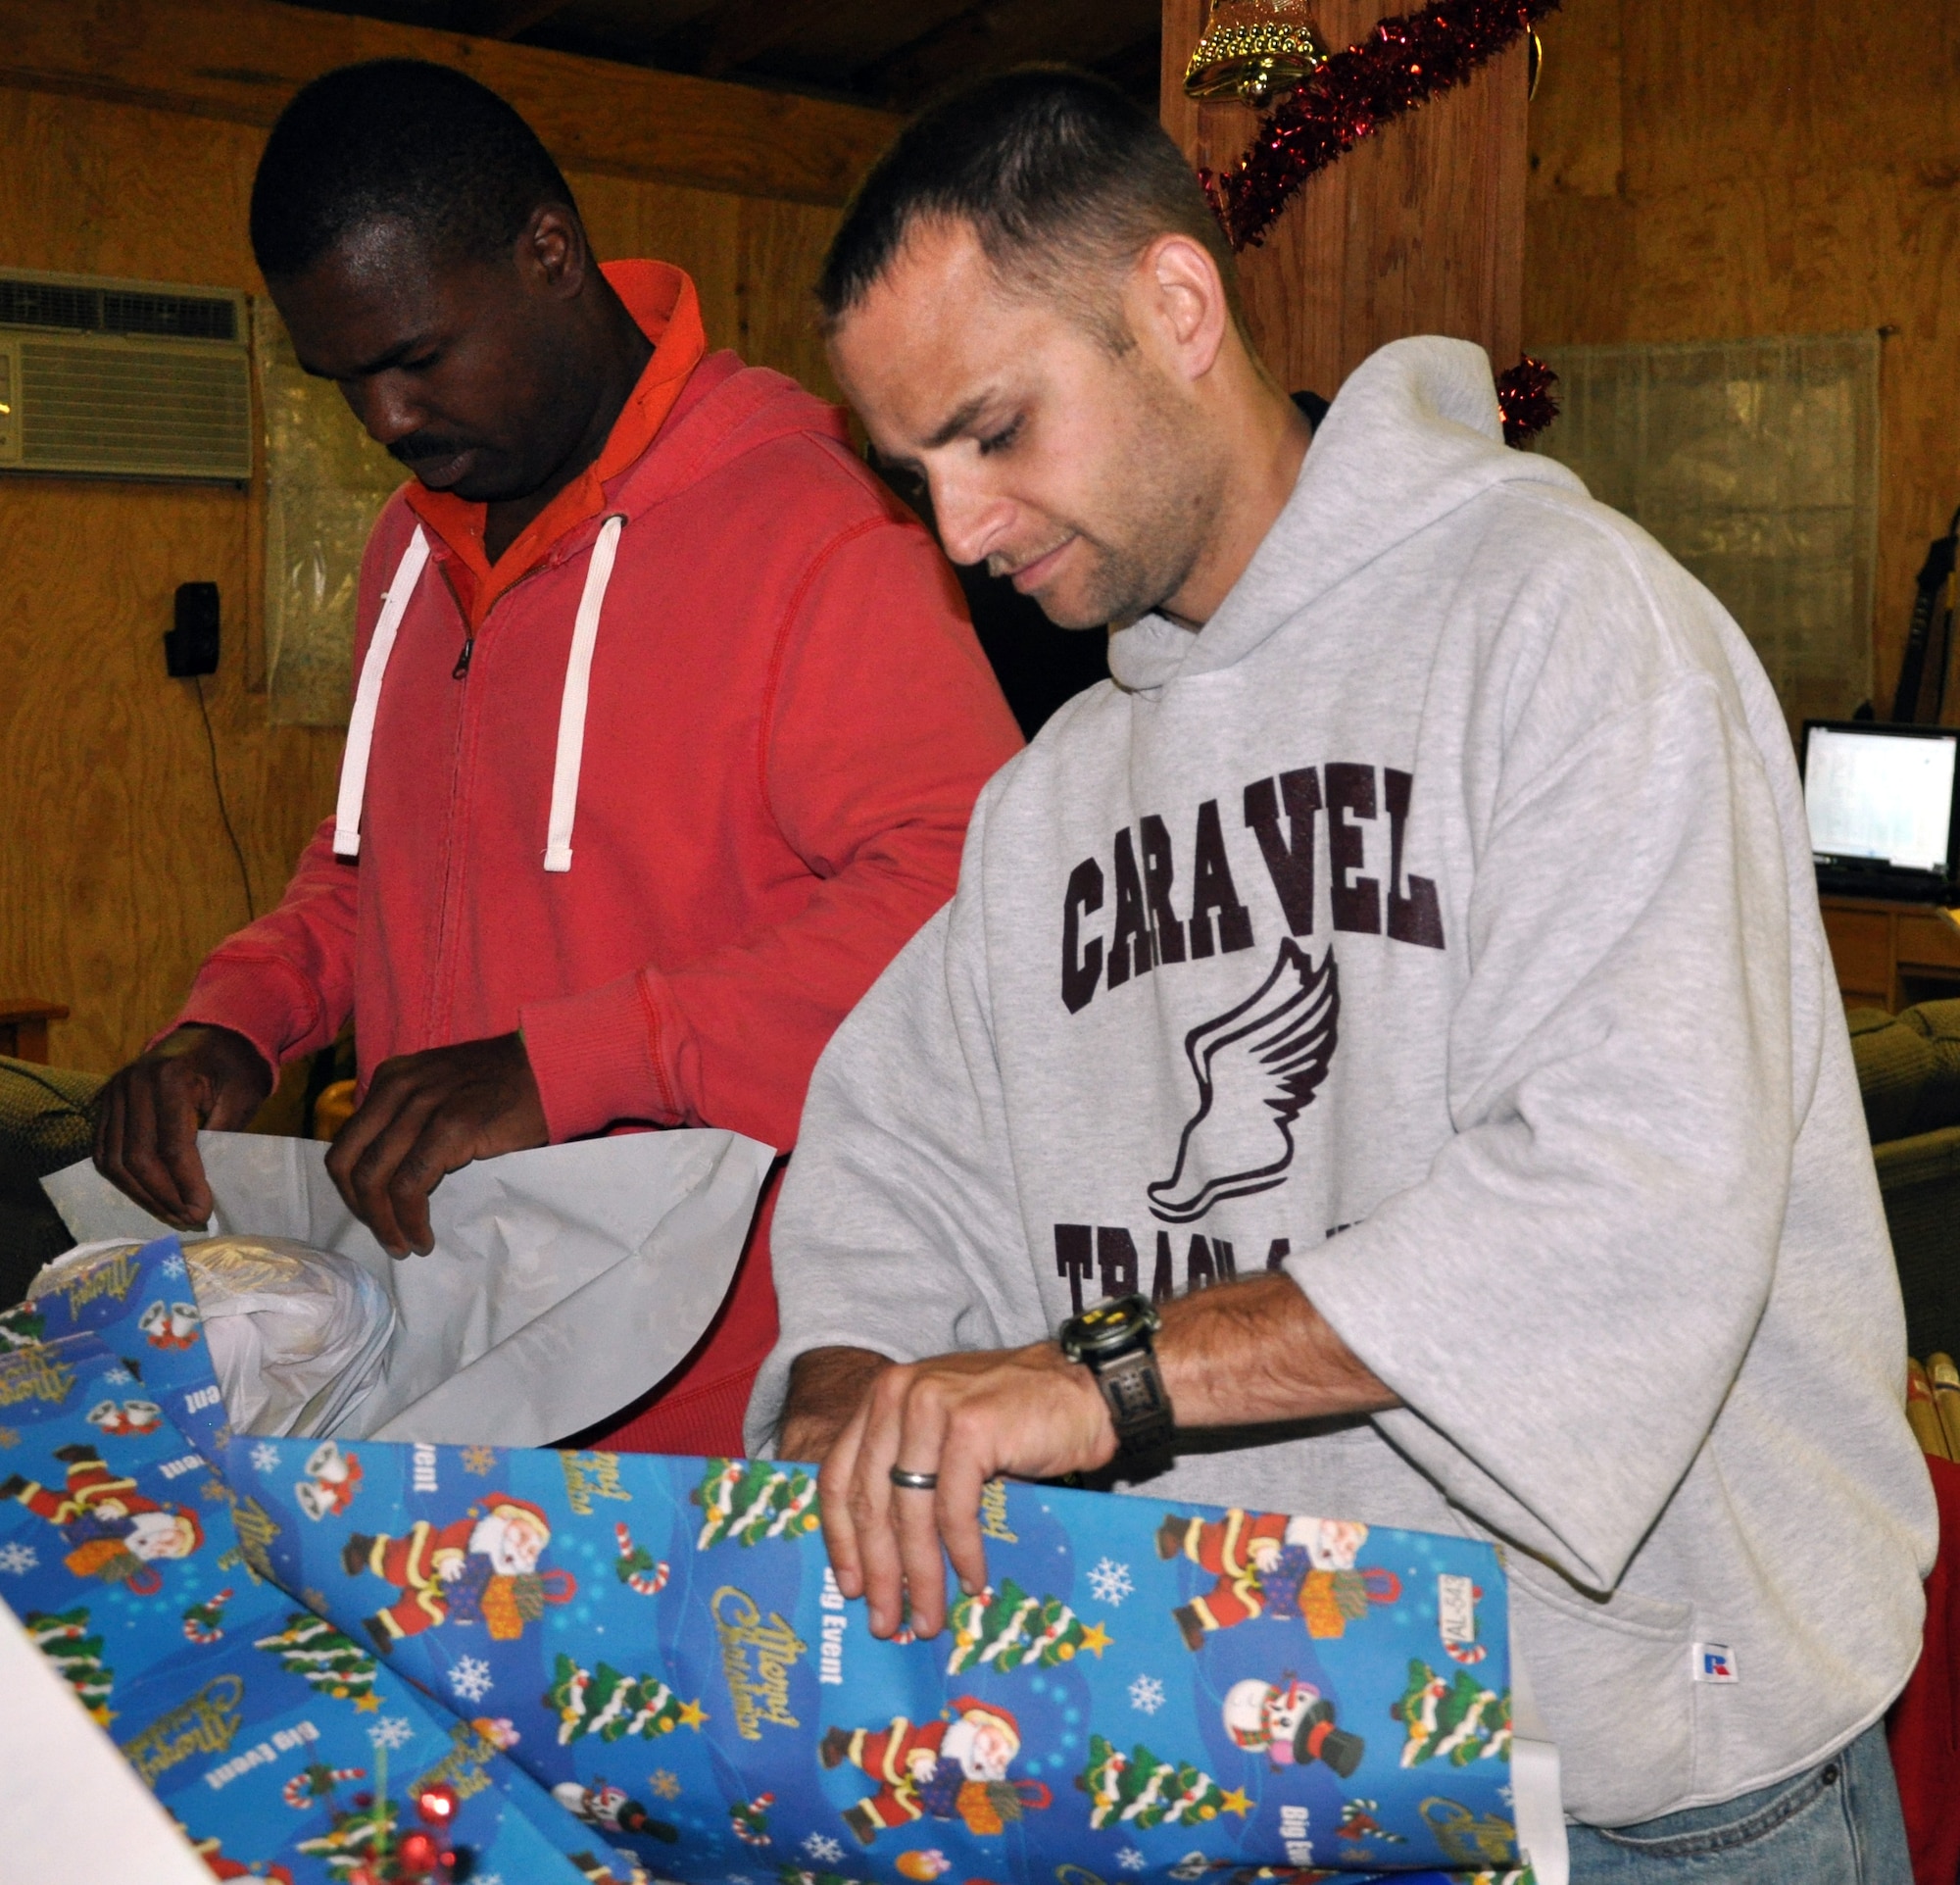 U.S. Army Capt. Jelani Berry and U.S. Air Force Capt. Michael Quashne wrap holiday gifts to be given to local orphans during a gift wrapping party held at Soto Cano Air Base, Honduras, Nov. 30, 2013.  More than 100 volunteers from Joint Task Force-Bravo participated in the event and wrapped more than 300 gifts to be given to the children.  (U.S. Air Force photo by Capt. Zach Anderson)